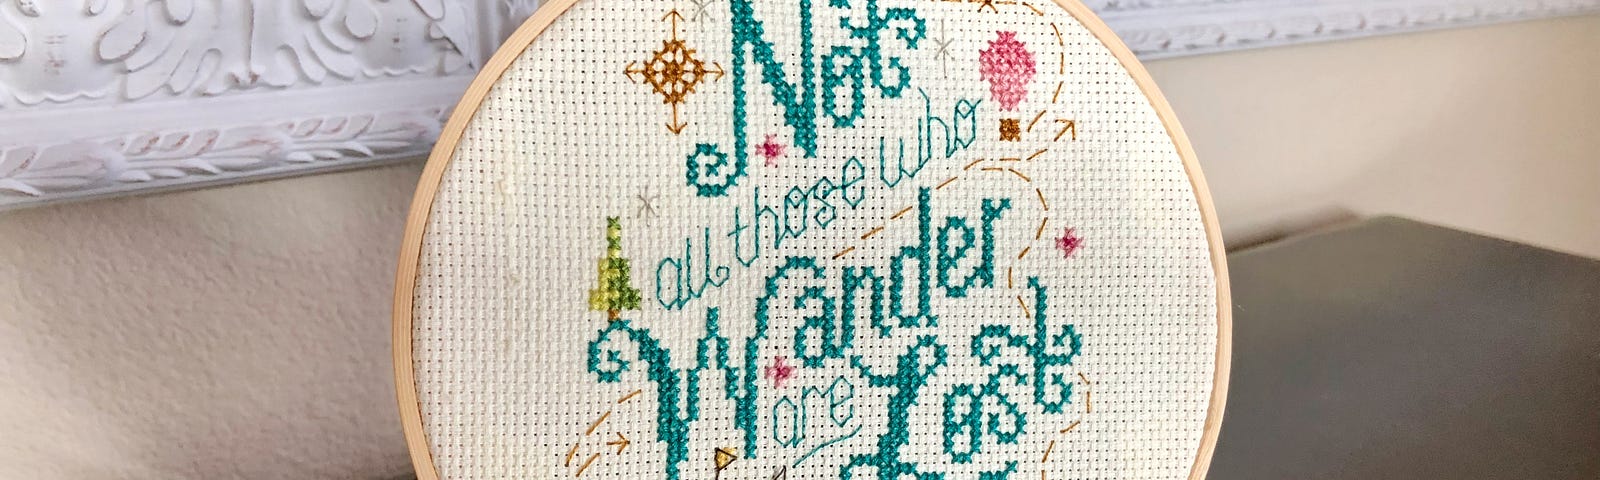 A cross stitch in a round frame saying ‘not all who wander are lost’